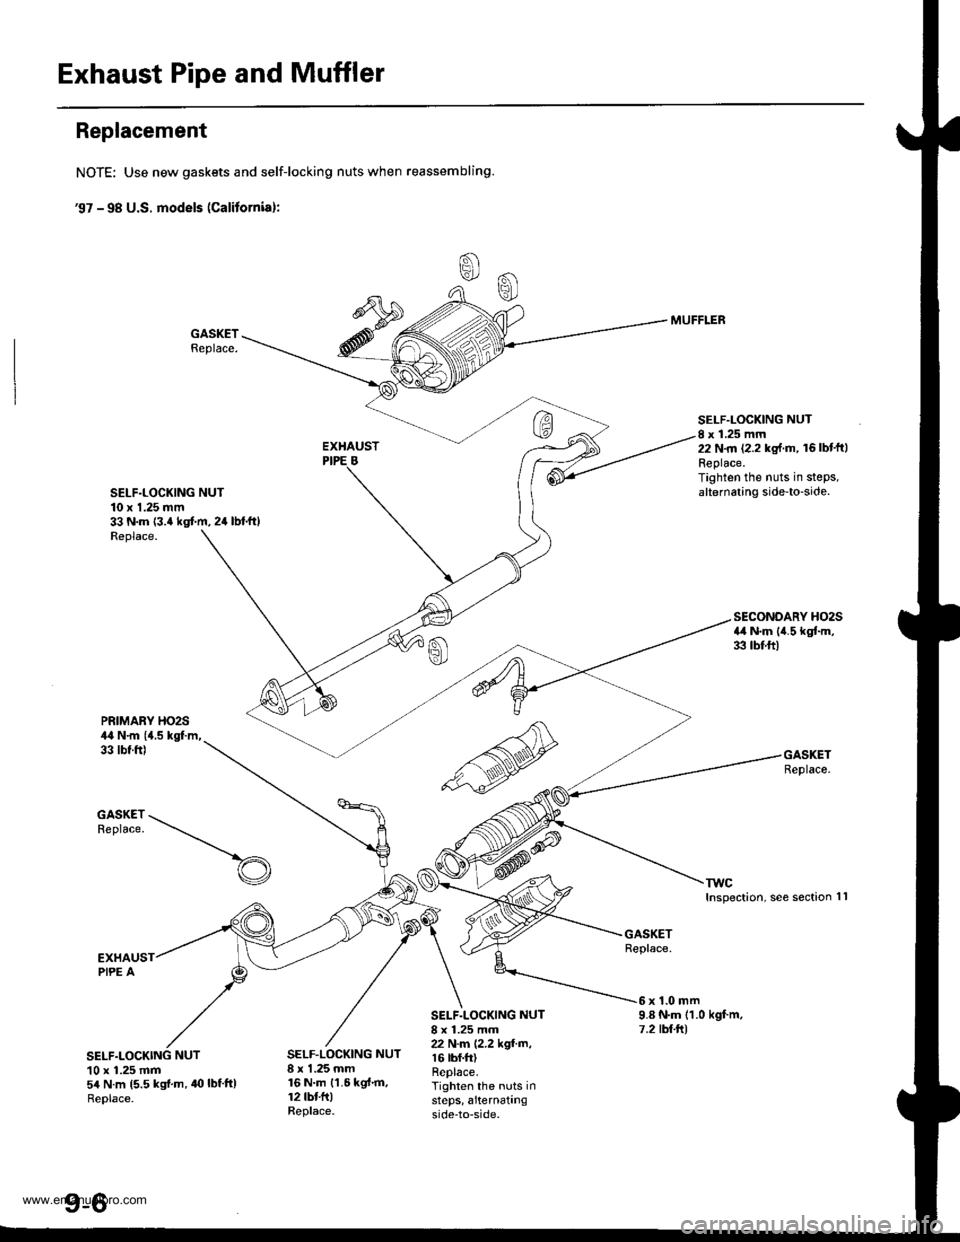 HONDA CR-V 1999 RD1-RD3 / 1.G Workshop Manual 
Exhaust Pipe and Muffler
Replacement
NOTE: Use new gaskets and self-locking nuts when reassembling.
€7 - 98 U.S. models (Calitornial:
GASKETReplace.
SELF.LOCKING NUT10 x 1.25 mm33 N.m {3.4 kgt m, 2